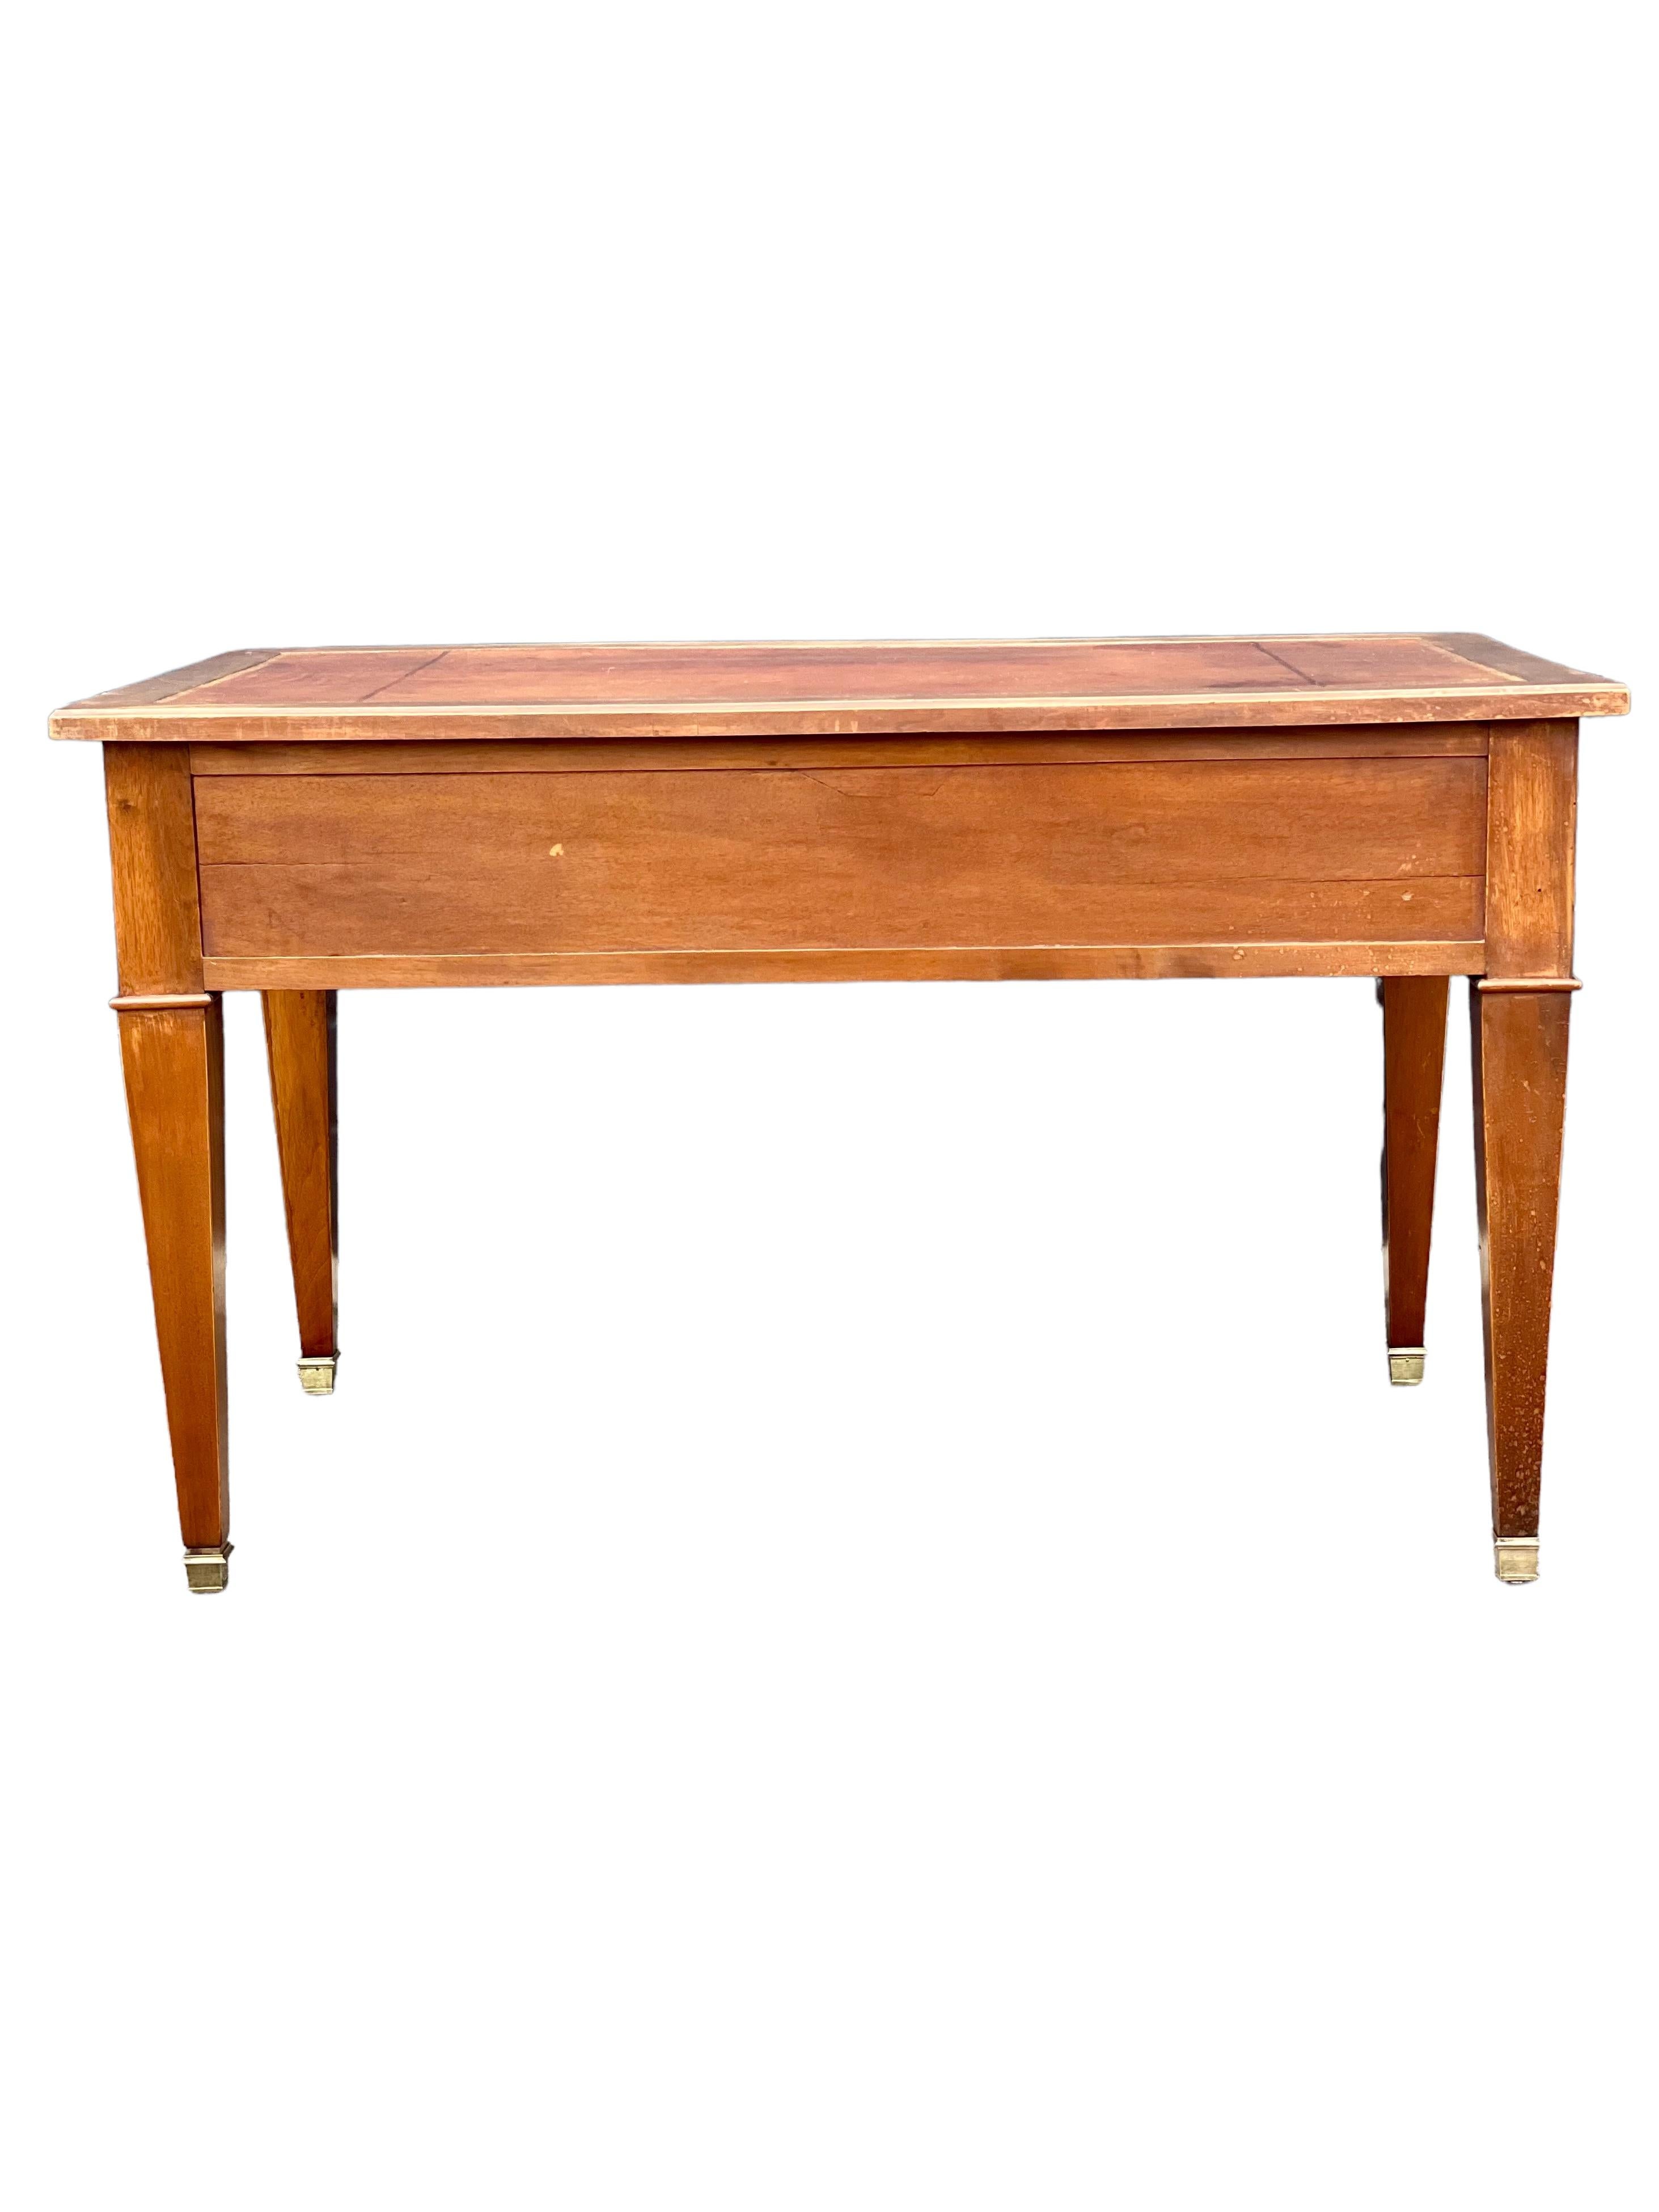 19th Century Louis XVI Style Leather Top Writing Desk For Sale 9